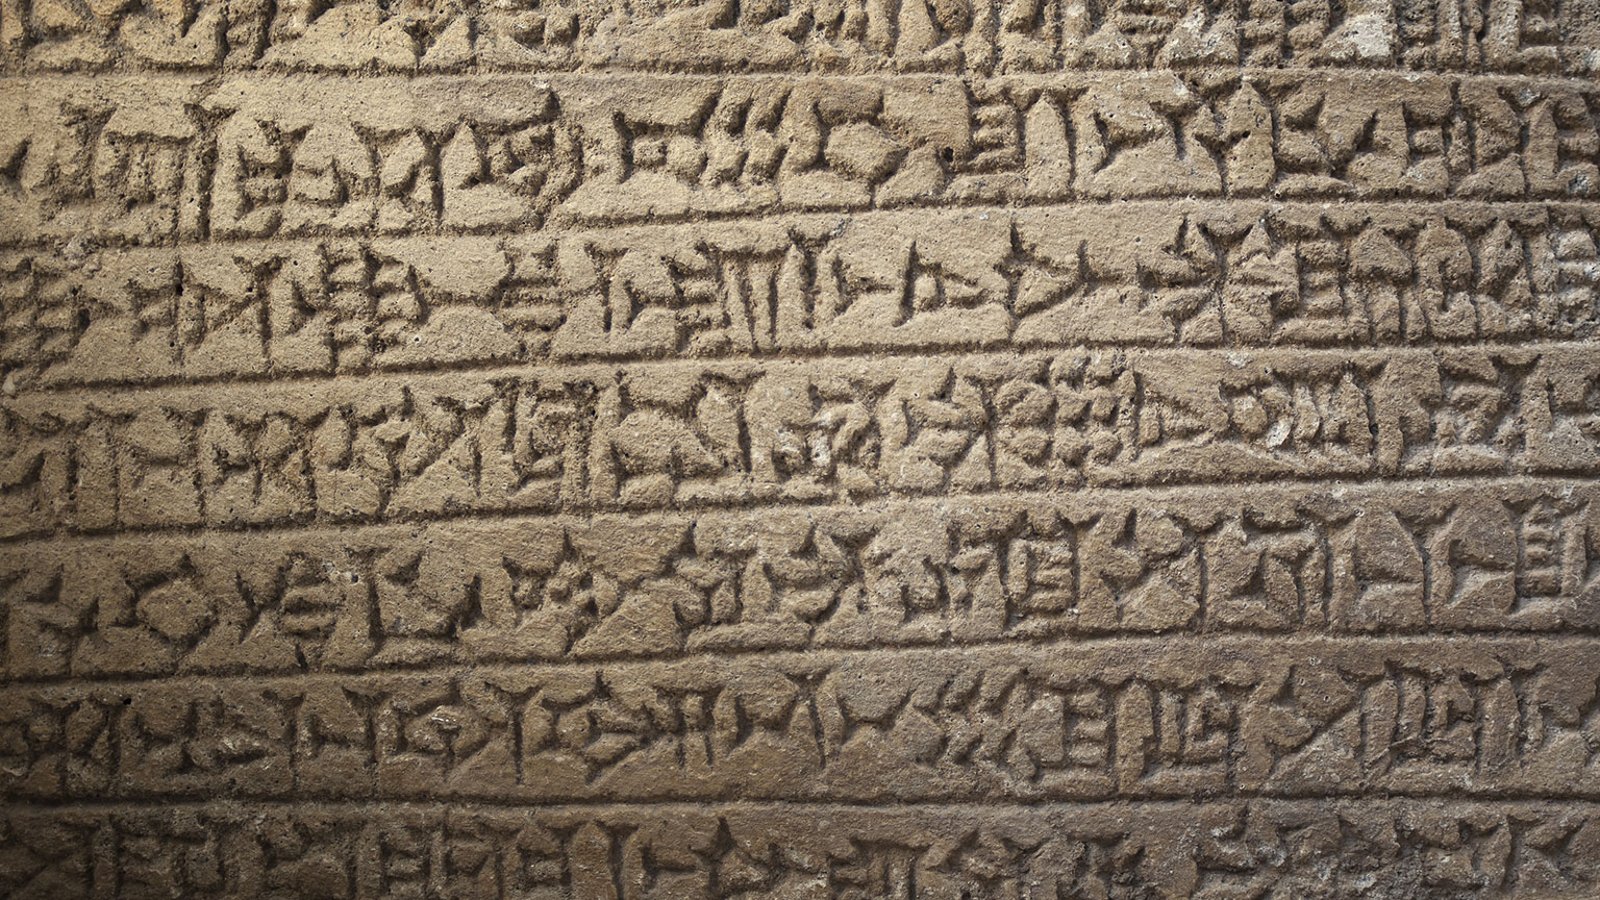 What Does Cuneiform Say?